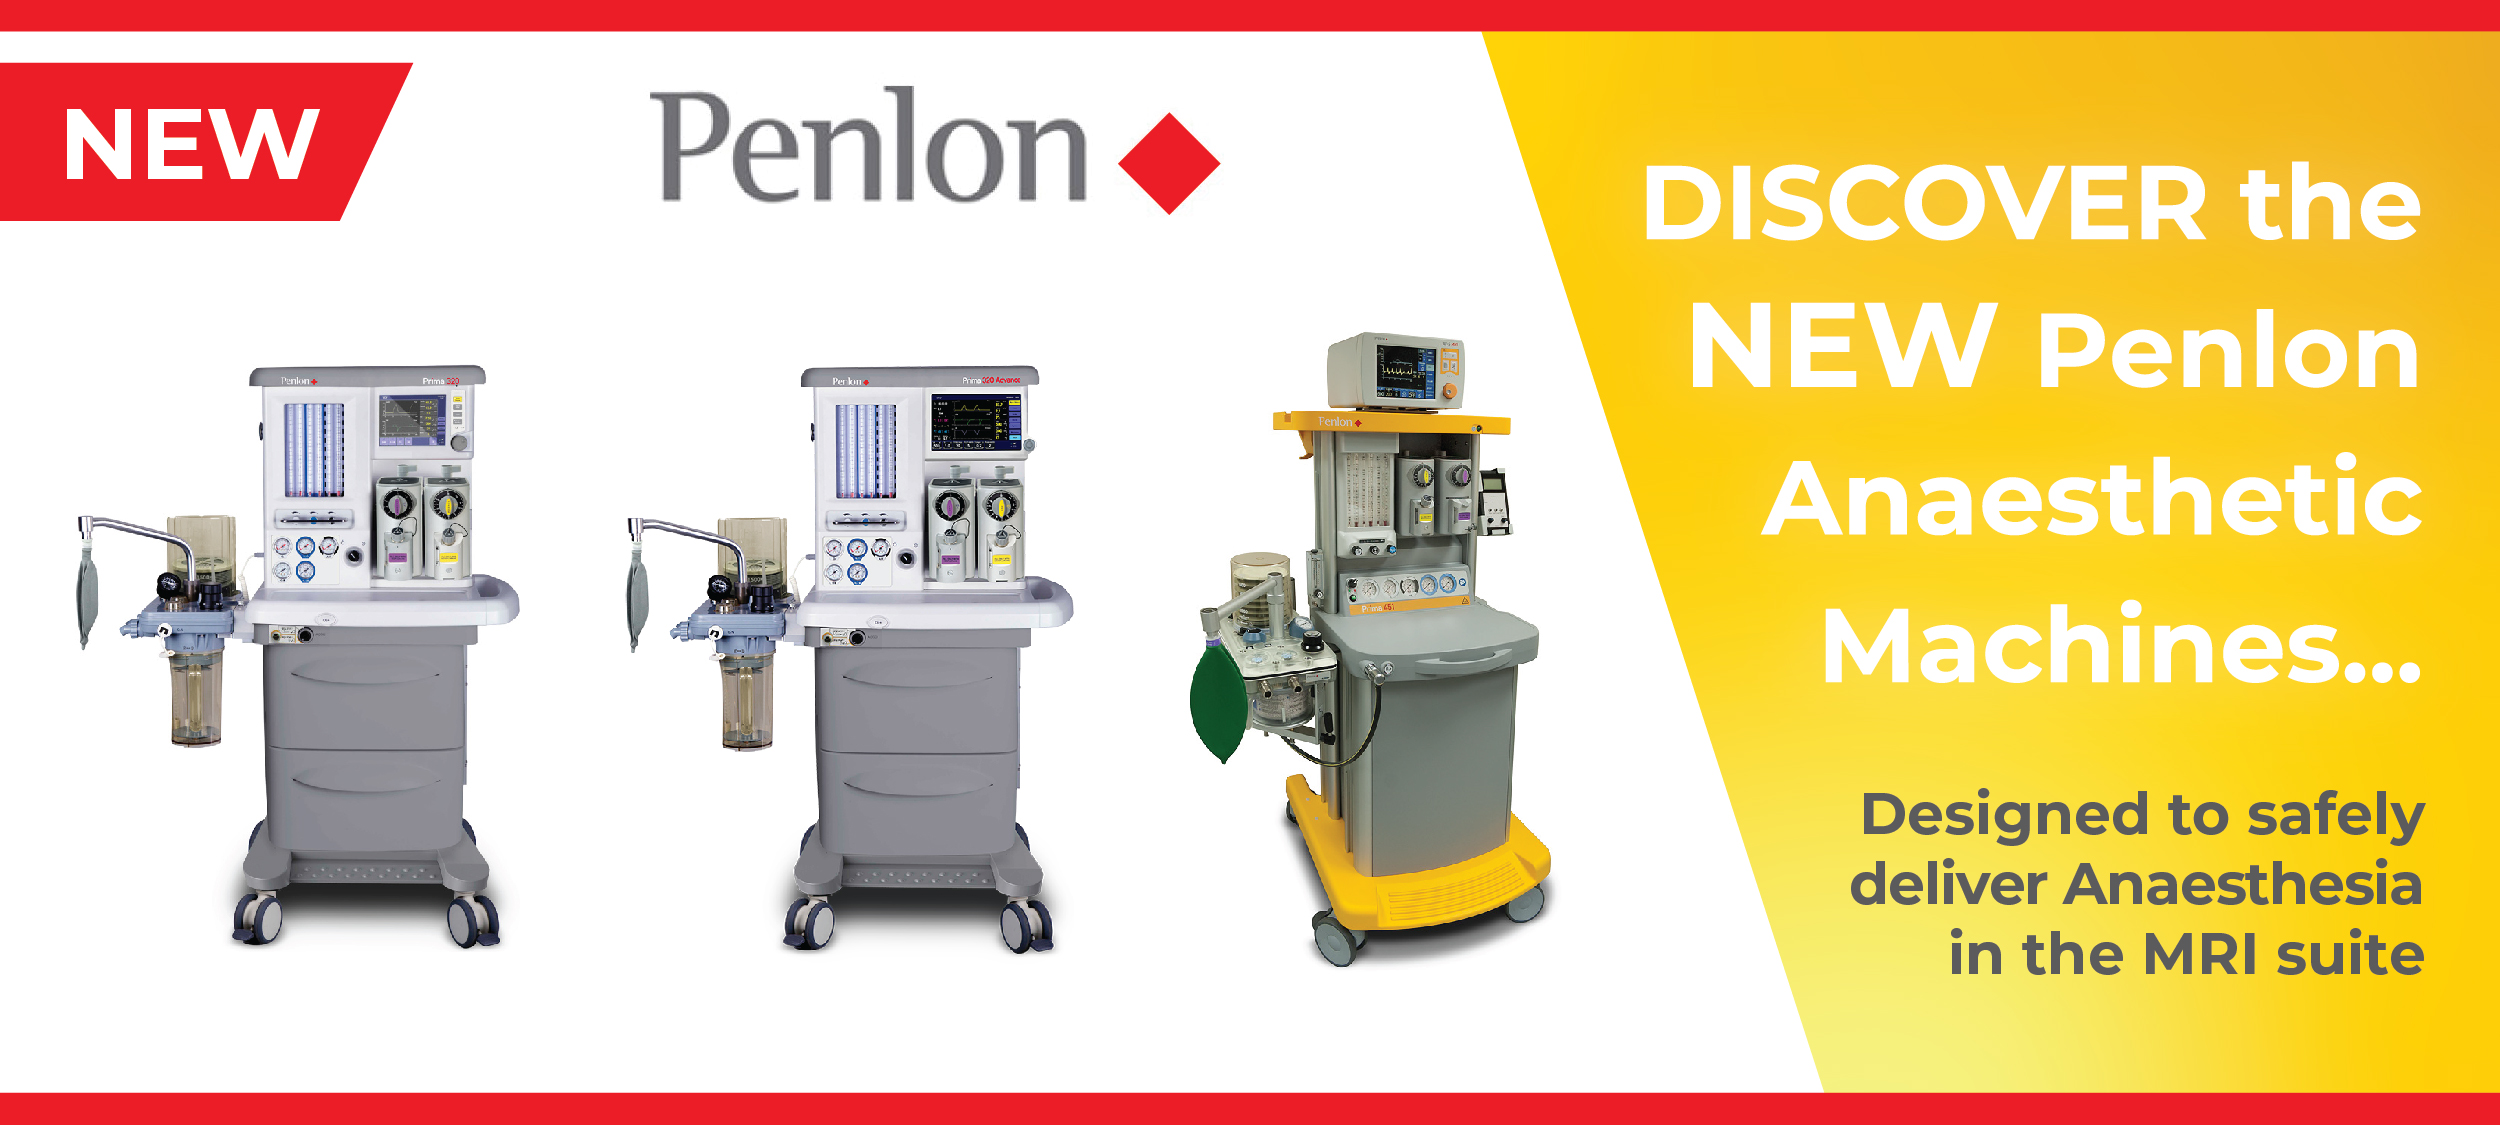 DISCOVER the NEW Penlon Anaesthetic Machines